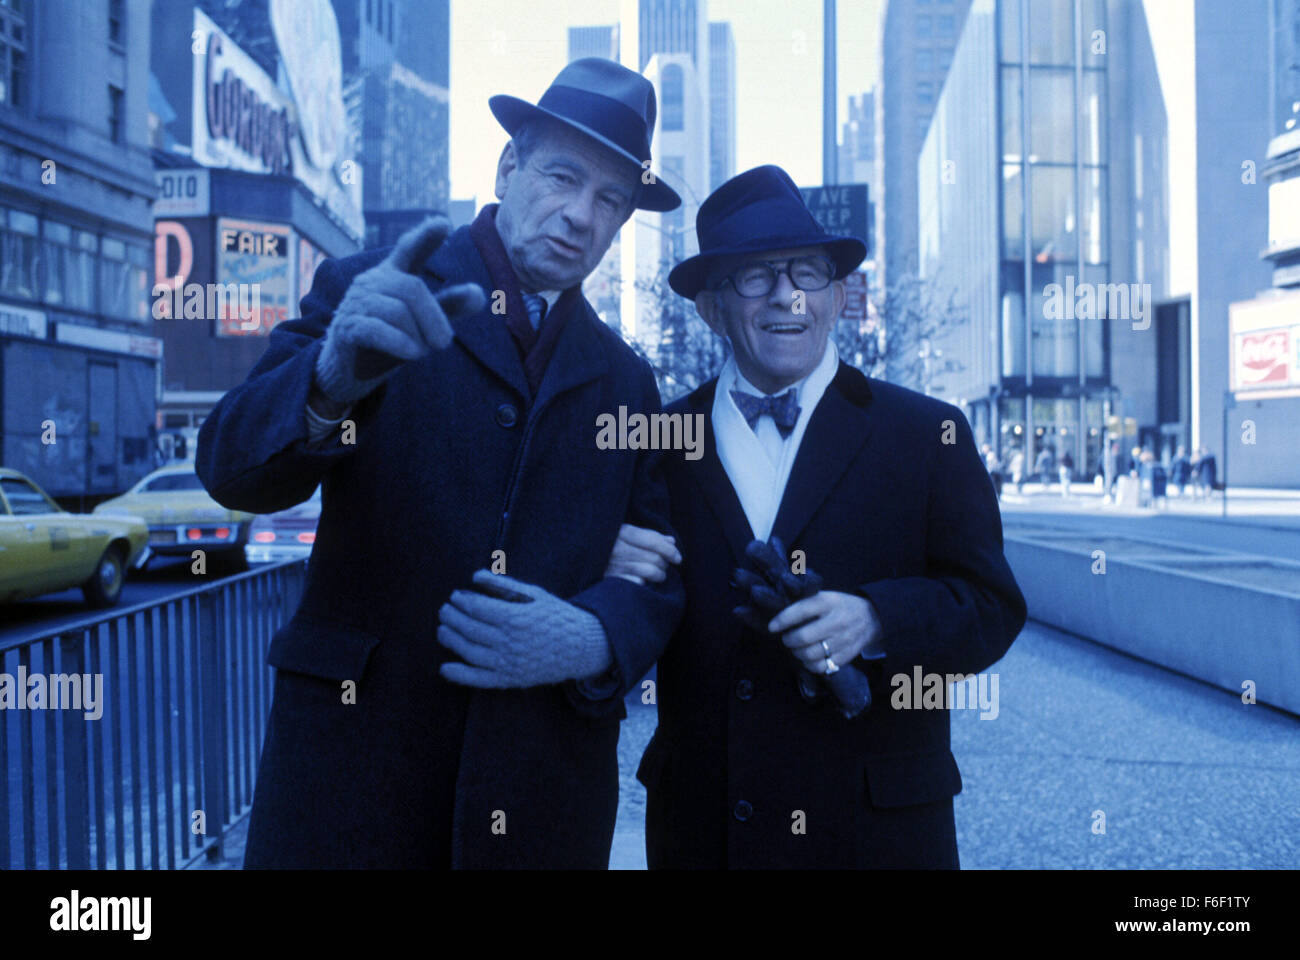 Nov 06, 1975; New York, NY, USA; WALTER MATTHAU and GEORGE BURNS star as Willy Clark and Al Lewis in the comedy 'The Sunshine Boys' directed by Herbert Ross. Stock Photo